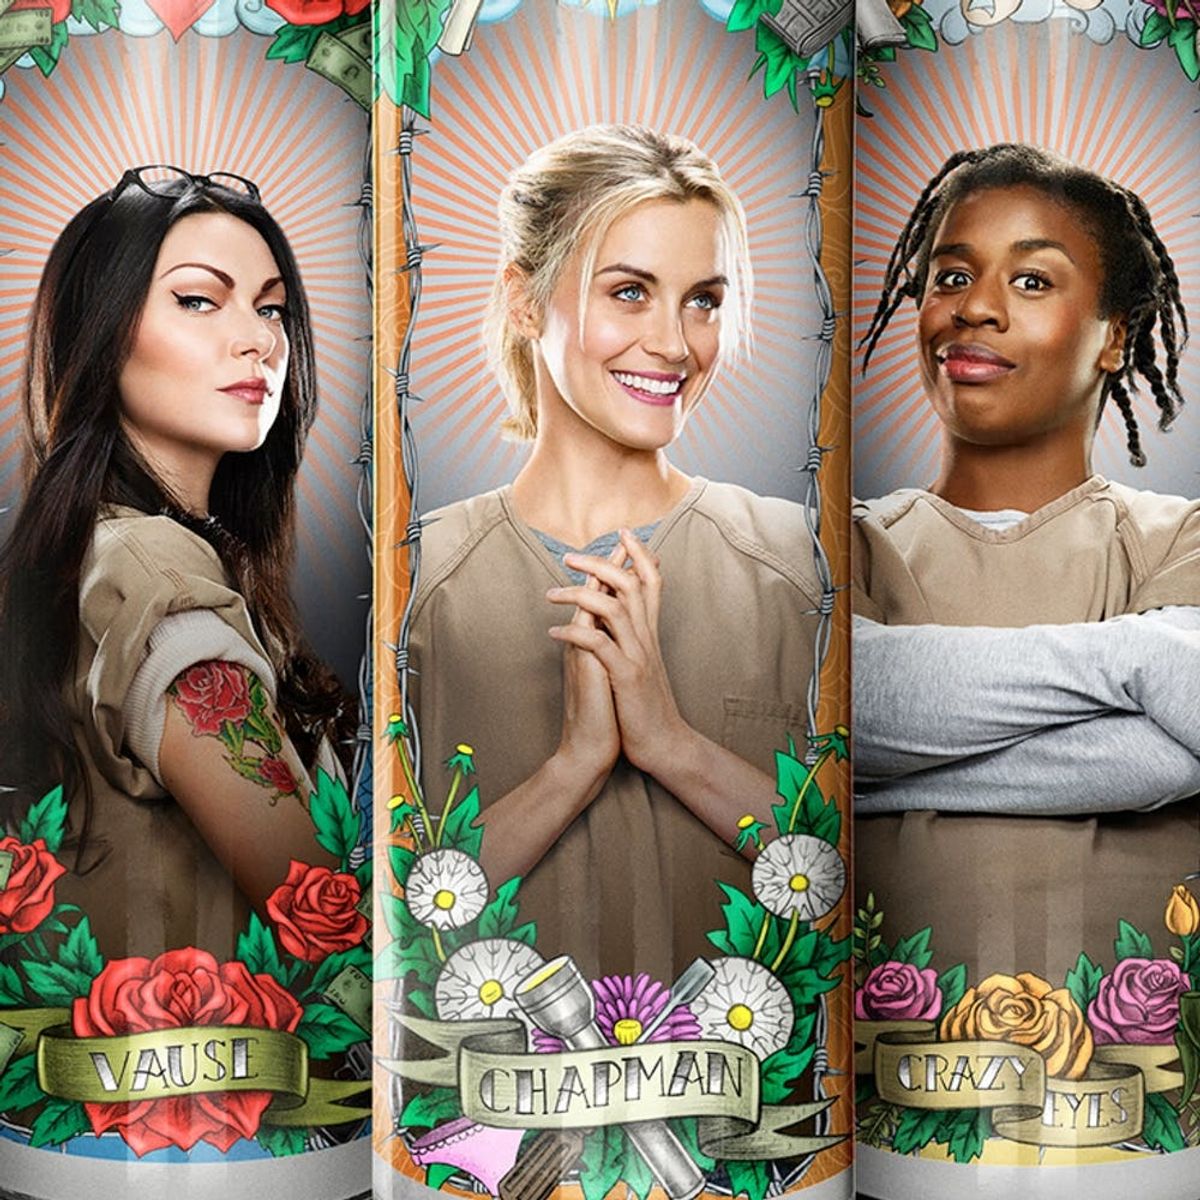 What to Stream This Weekend After You Binge Watch OITNB